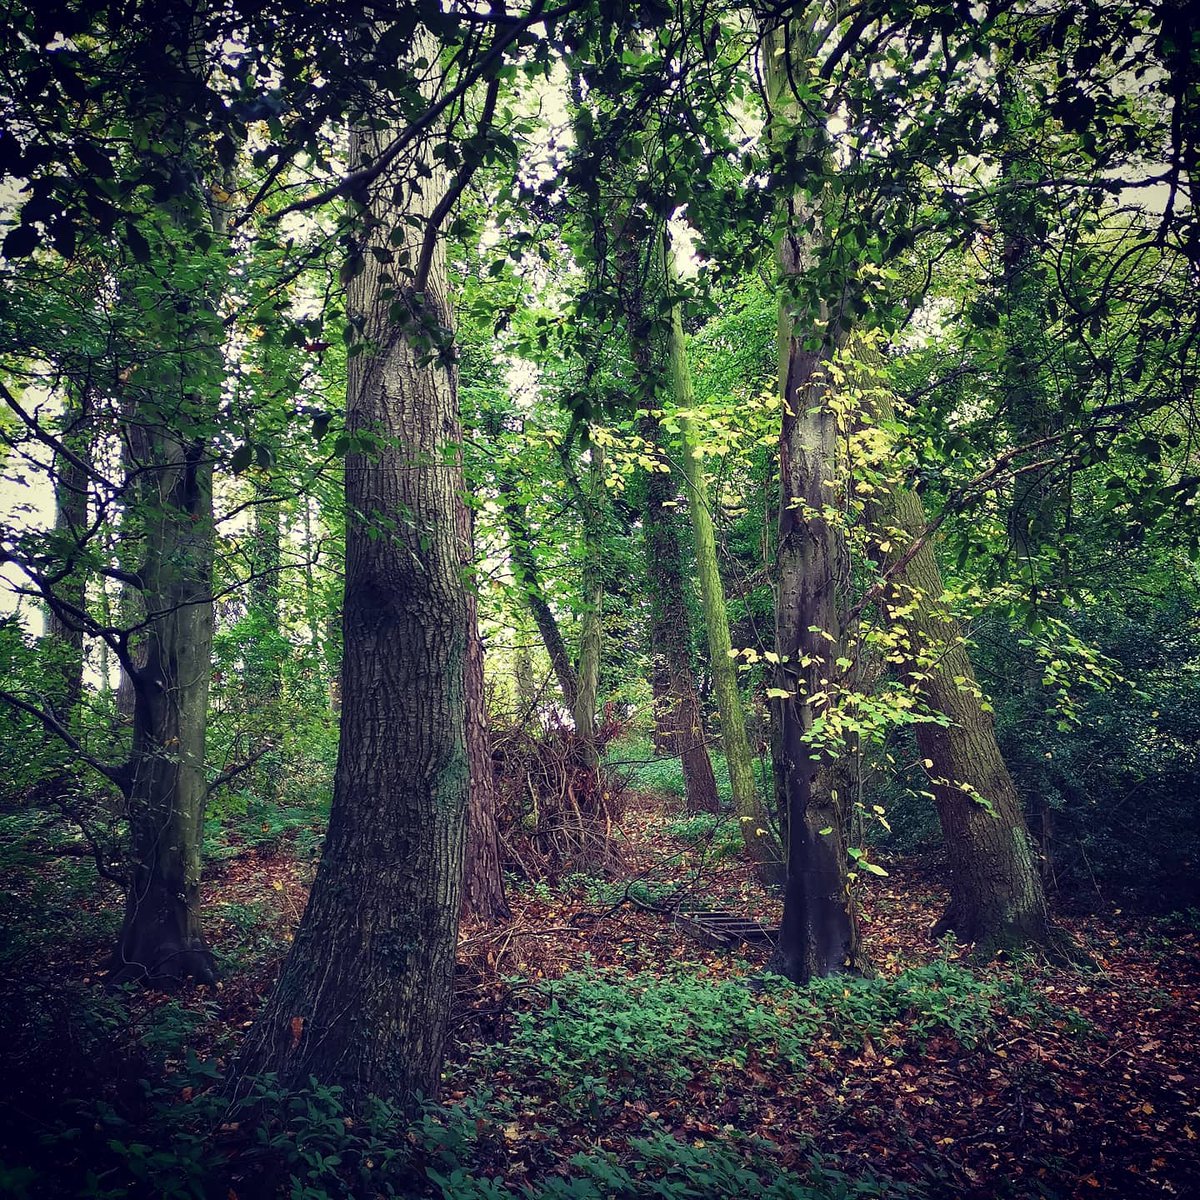 So many lovely woodland walks at this time of year, love the enclosure and comfort of trees as the seasons turn #woodlands #trees #autumn #getoutside #freshair #stretchthoselegs #Northumberland #gardendesign #plantingdesign #gardendesigner